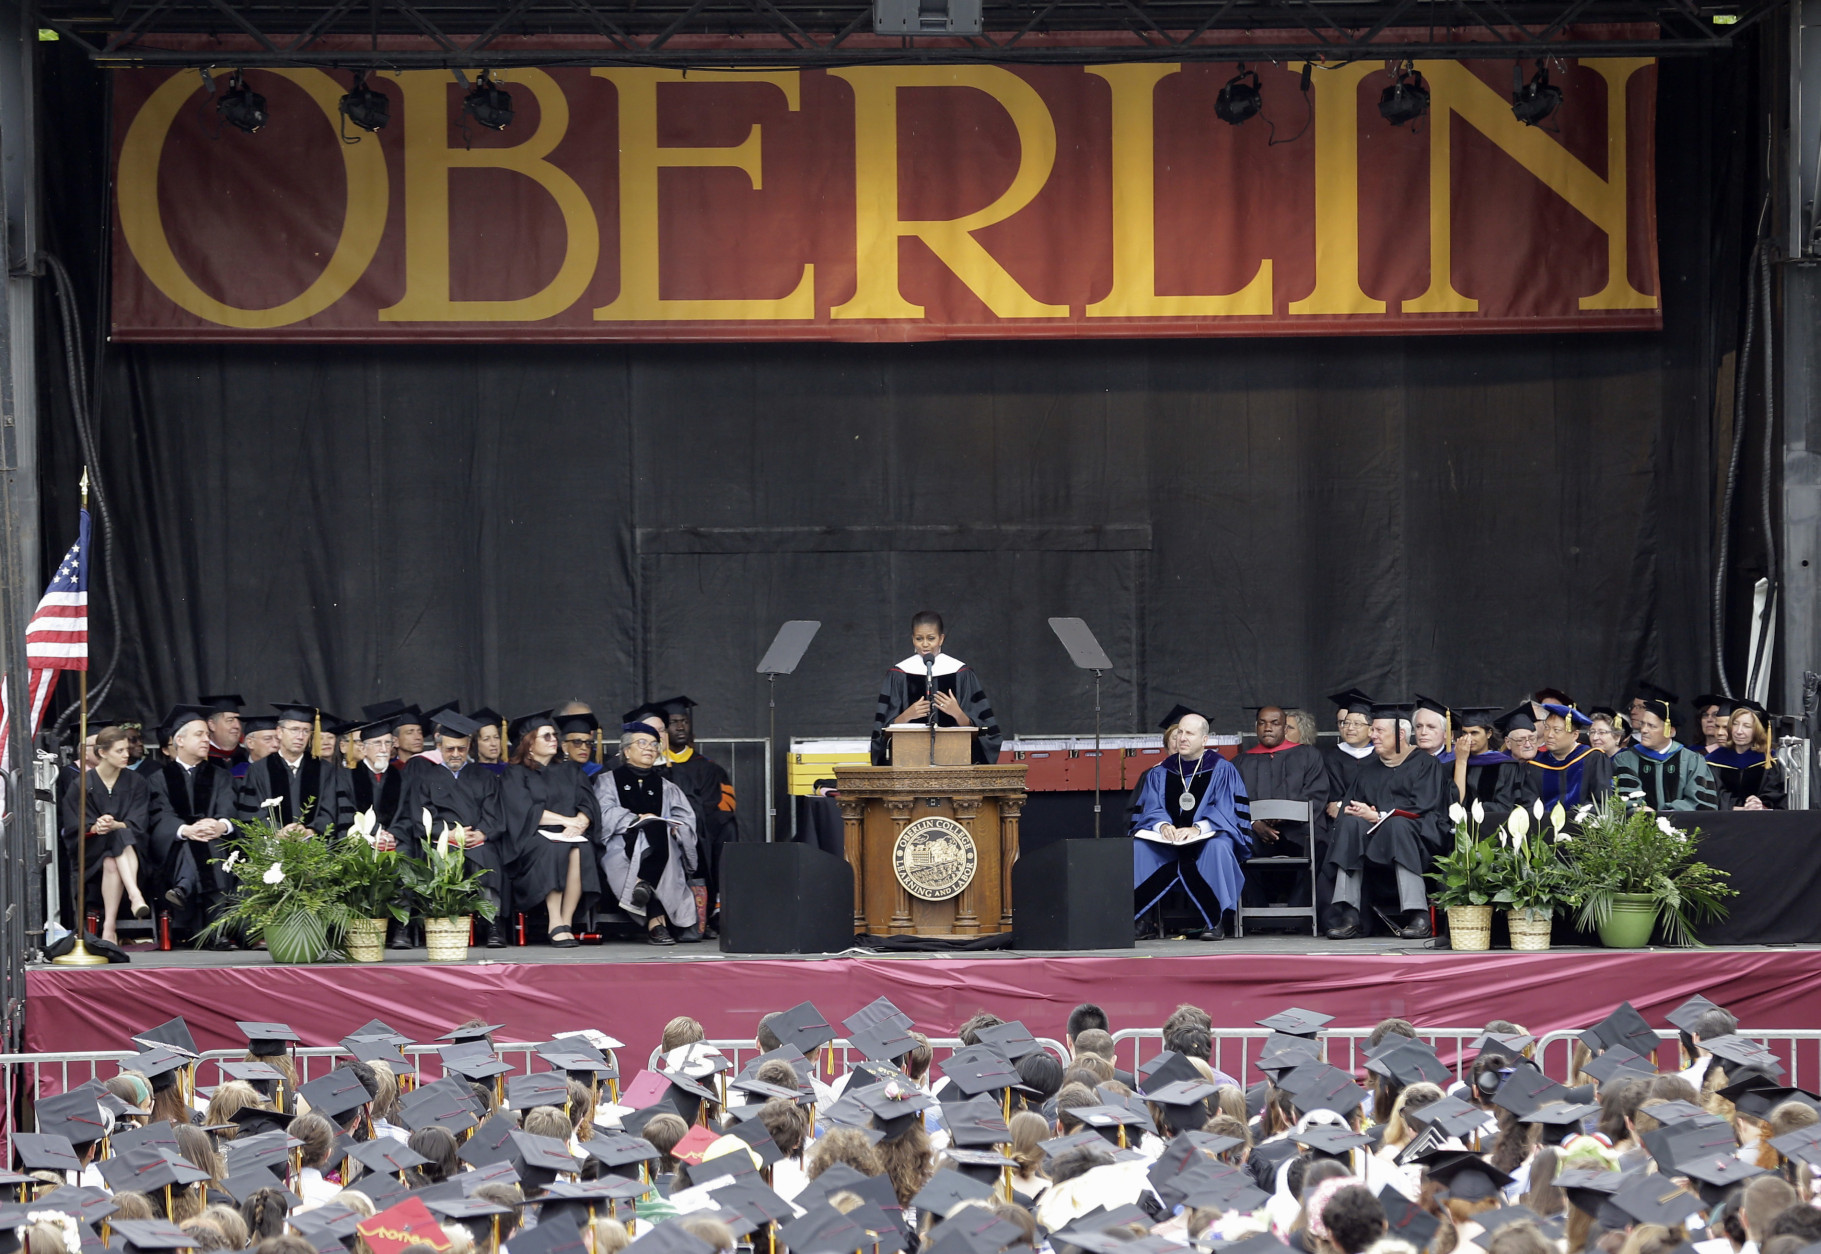 First lady Michelle Obama speaks after receiving an Honorary Degree of Doctor of Humanities from Oberlin College, Monday, May 25, 2015, in Oberlin, Ohio. (AP Photo/Tony Dejak)